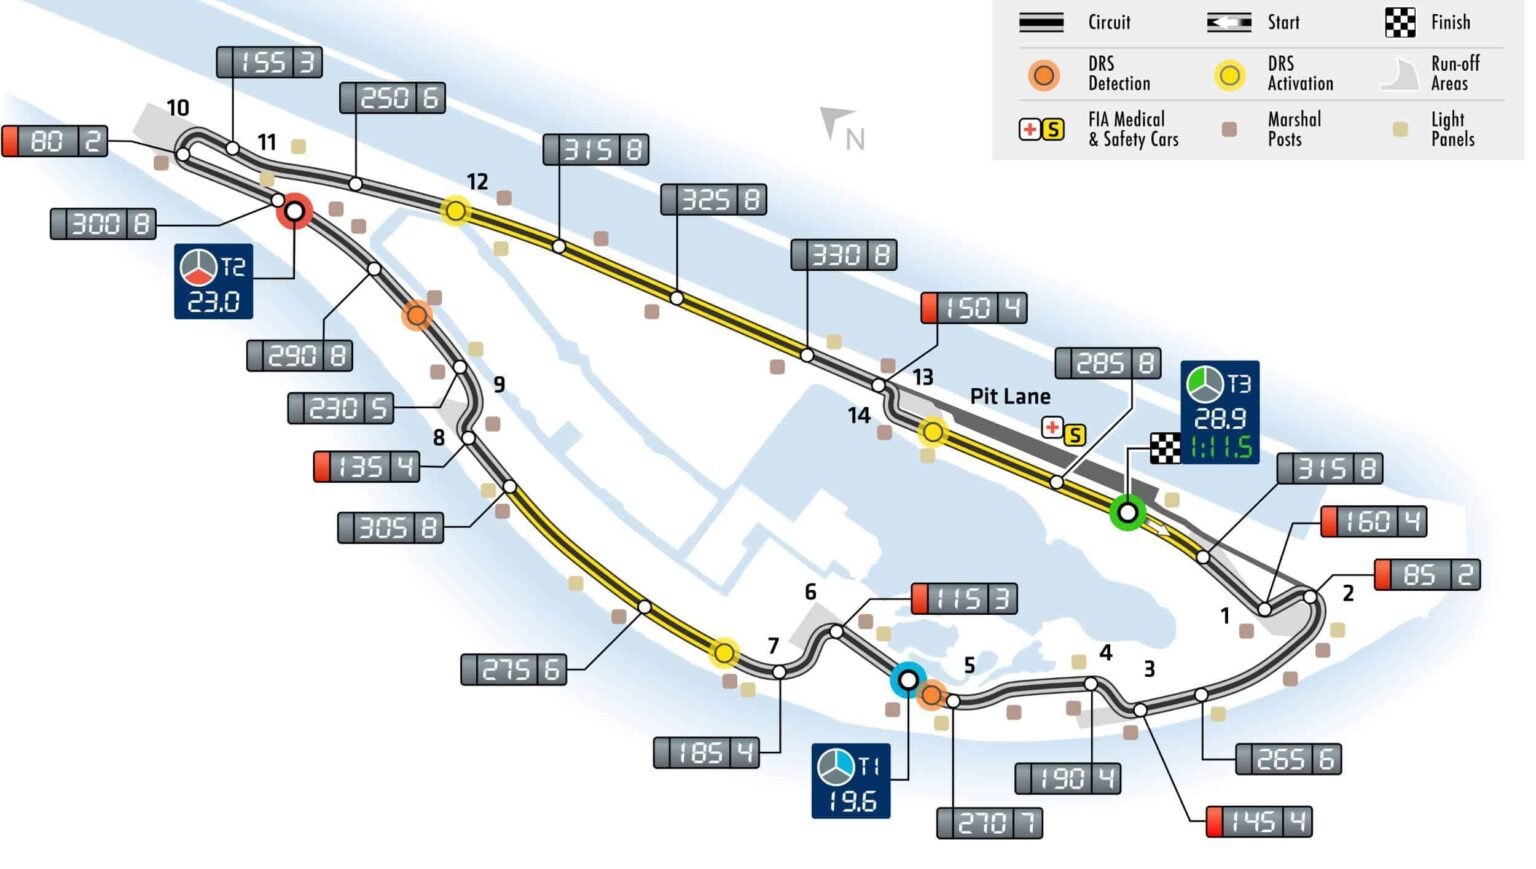 How many DRS zones are there at the Canadian GP?